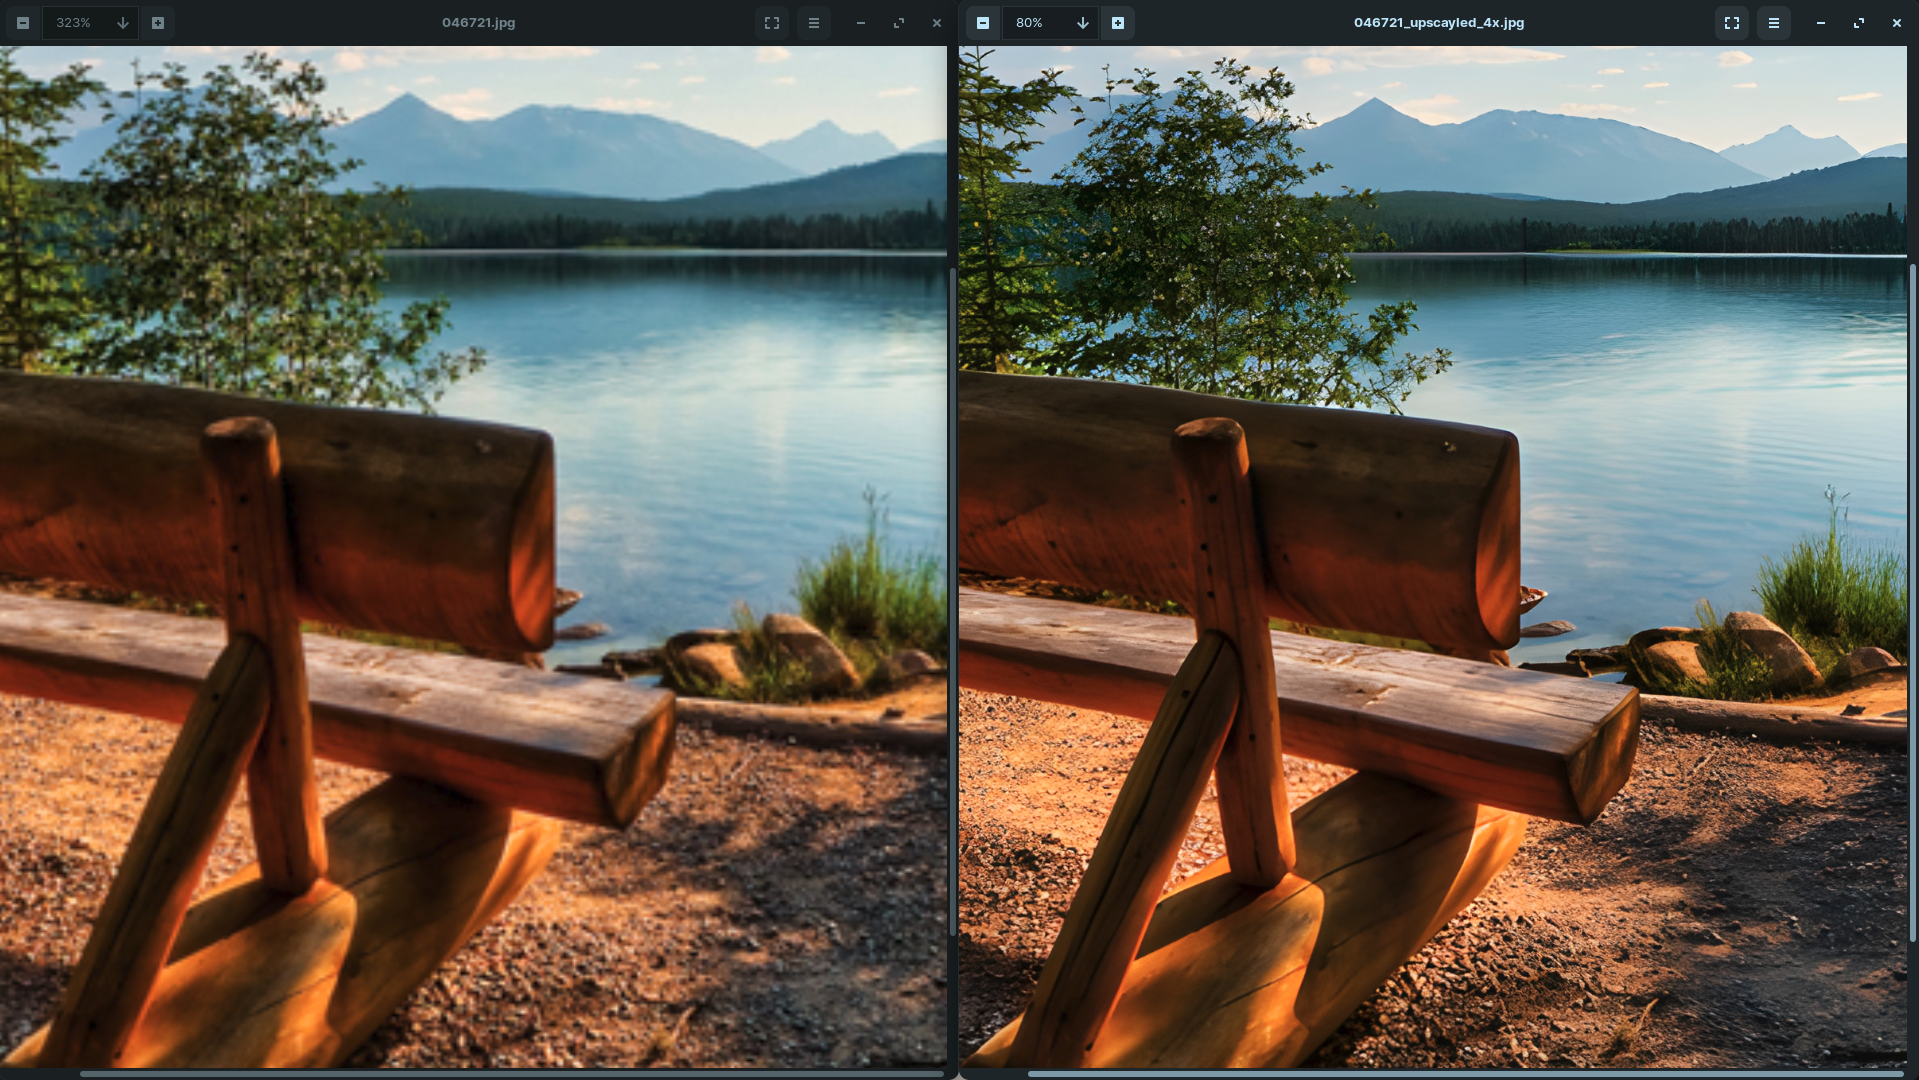 How to Clean Up Pictures Part 1: Upscaling & Sharpening